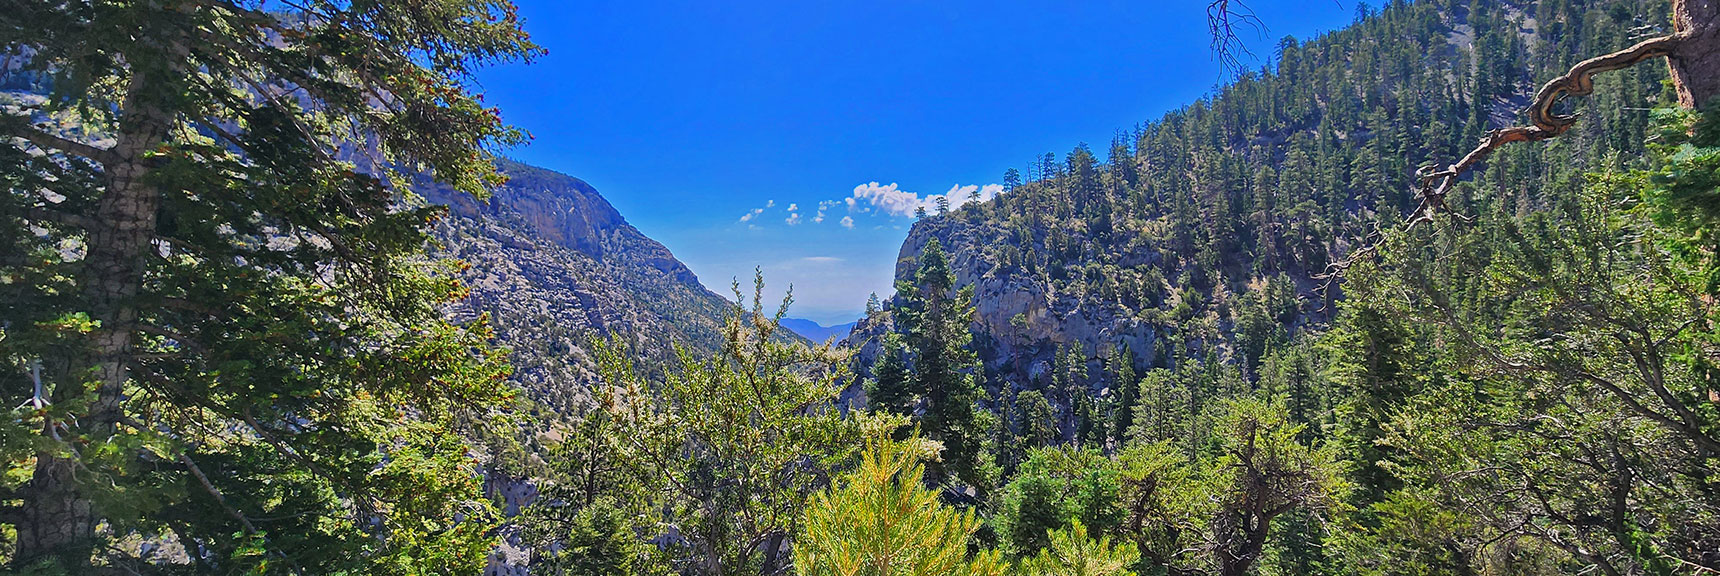 Downward View. Turns Out I May Be Not Too Far From North Loop Trail! | Fletcher Canyon / Fletcher Peak / Cockscomb Ridge Circuit | Mt. Charleston Wilderness | Spring Mountains, Nevada